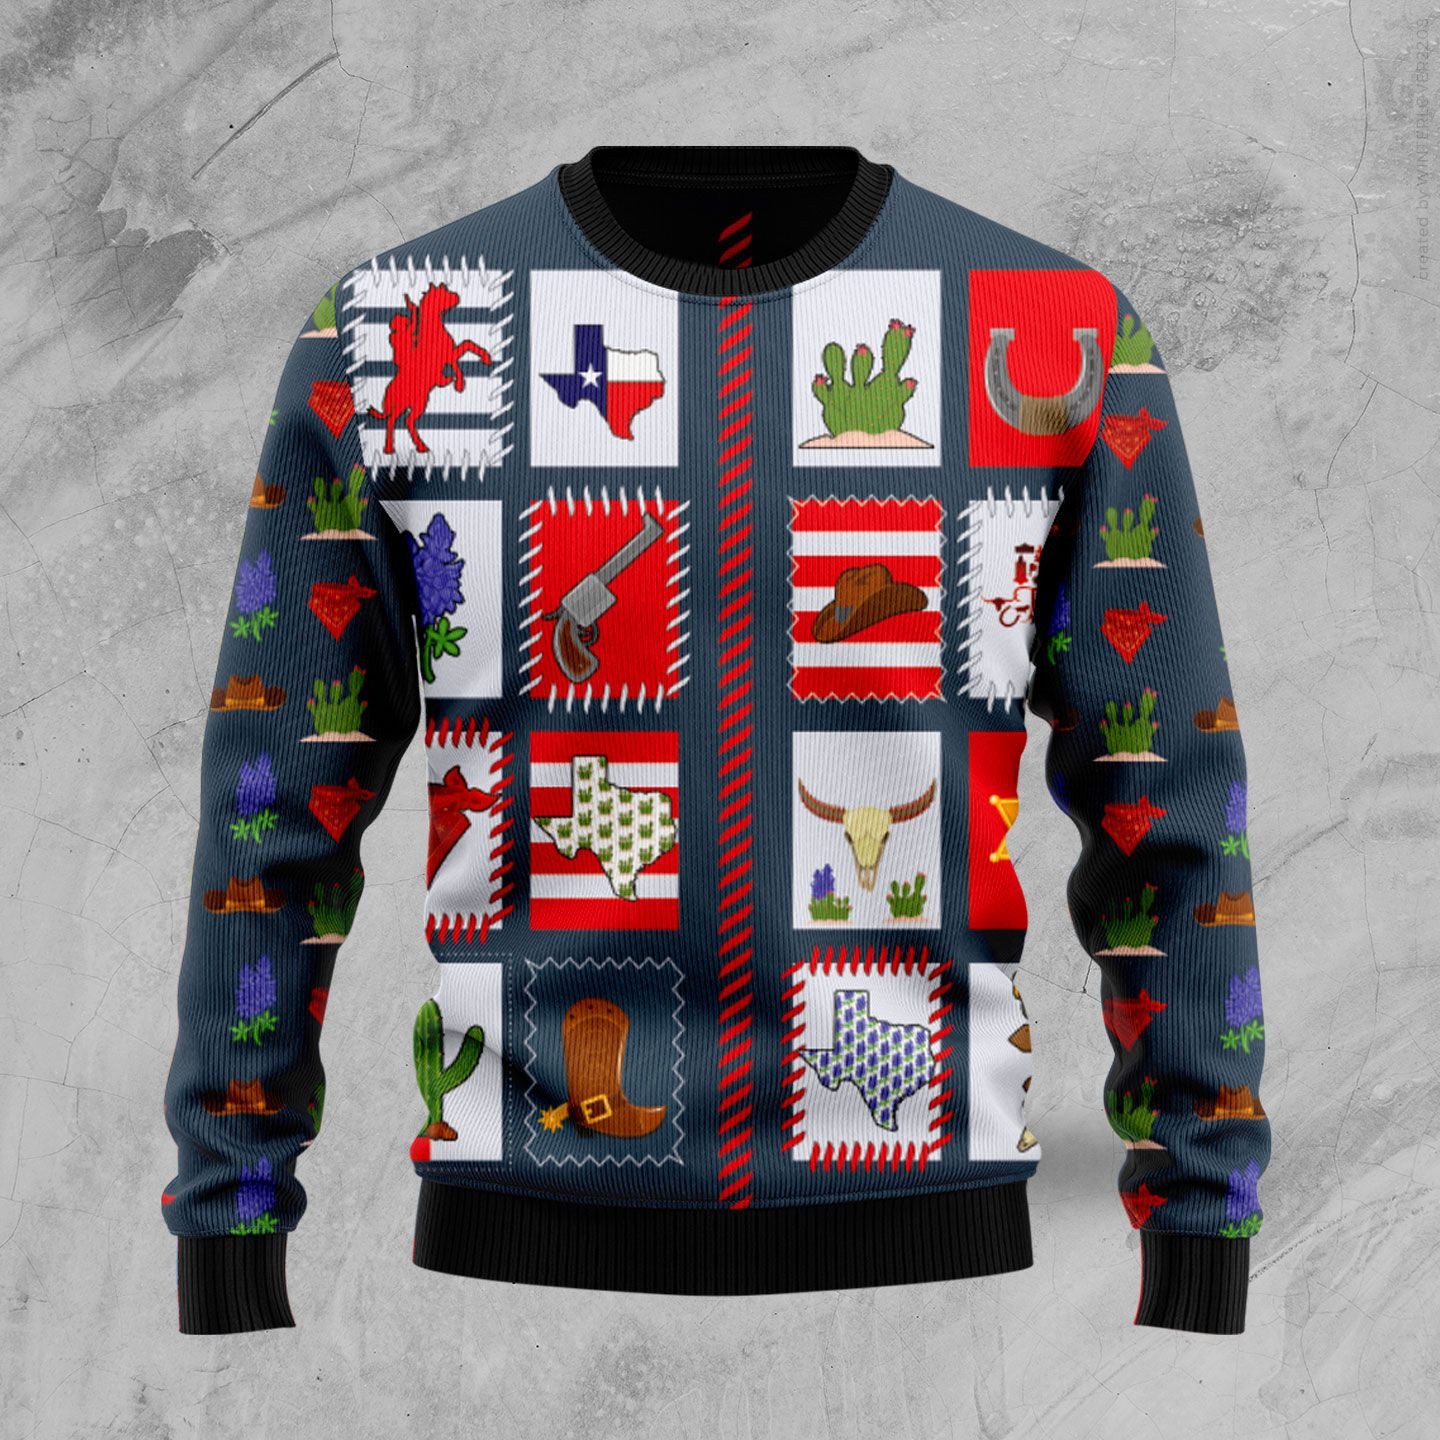 Texas Awesome Ugly Christmas Sweater, Ugly Sweater For Men Women, Holiday Sweater